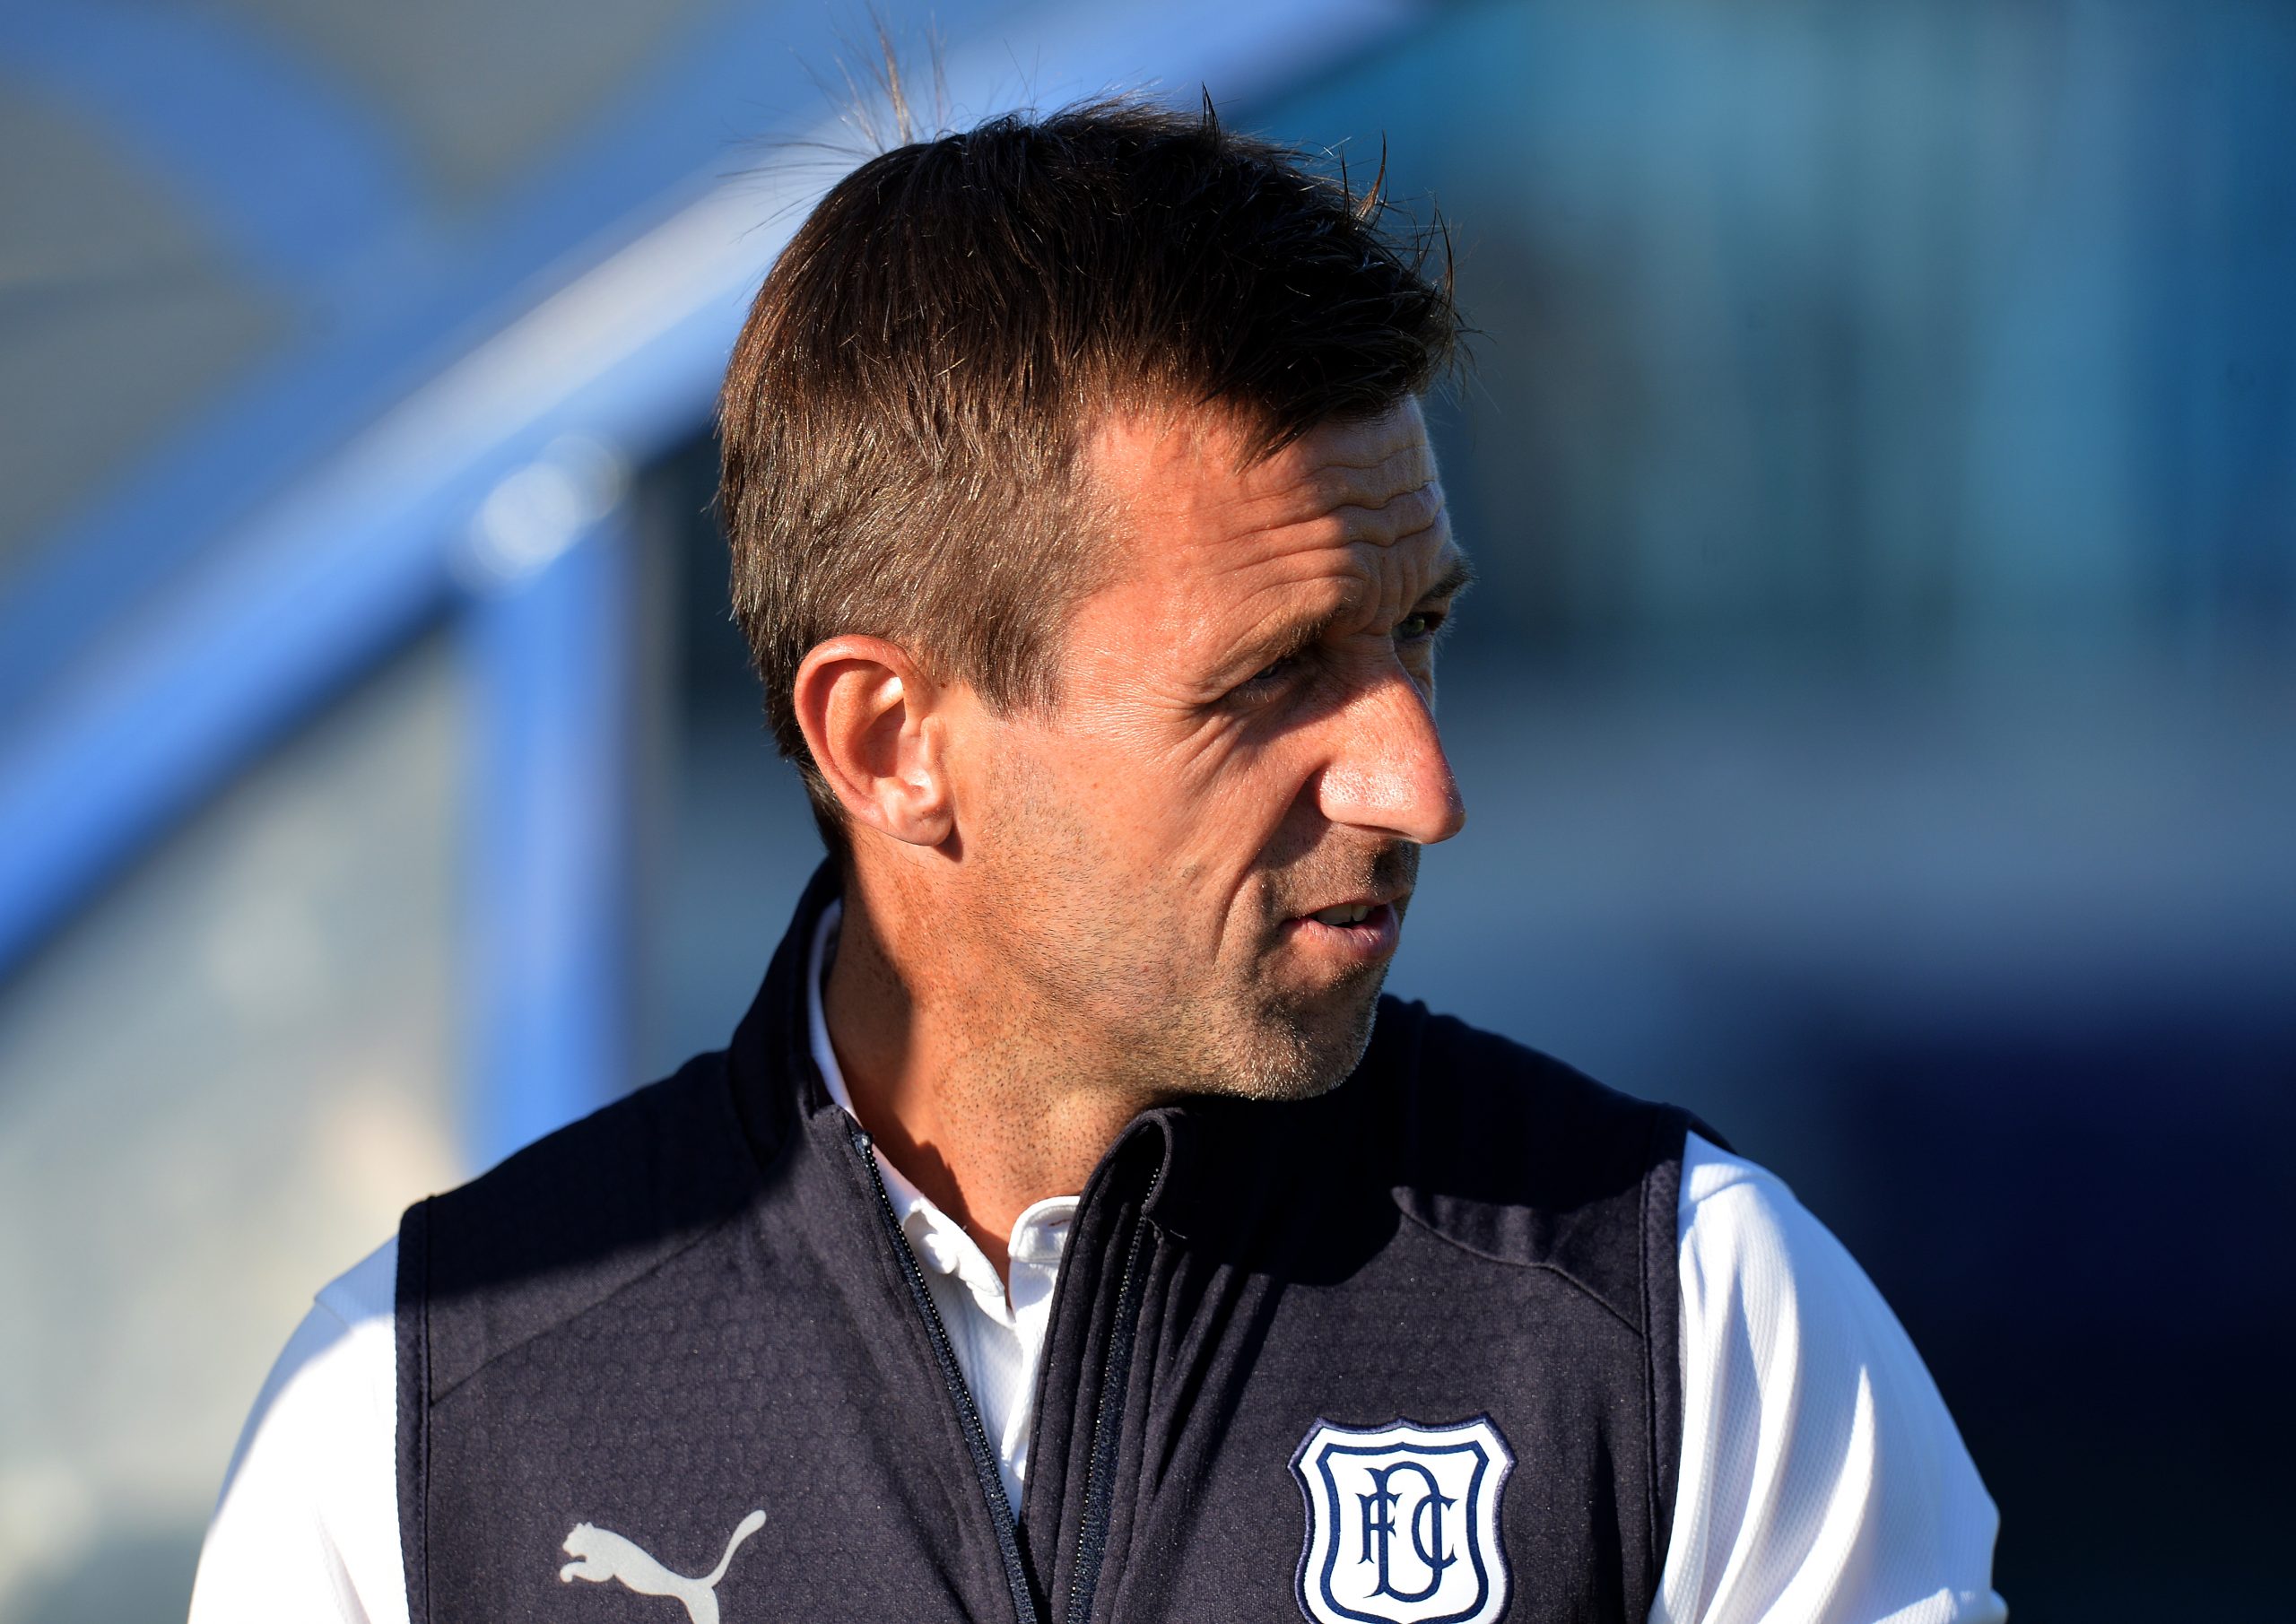 COWDENBEATH, SCOTLAND - JULY 02: Dundee manager Neil McCann looks on during the pre-season friendly between Cowdenbeath and Dundee at Central Park on July 2, 2018 in Cowdenbeath, Scotland.